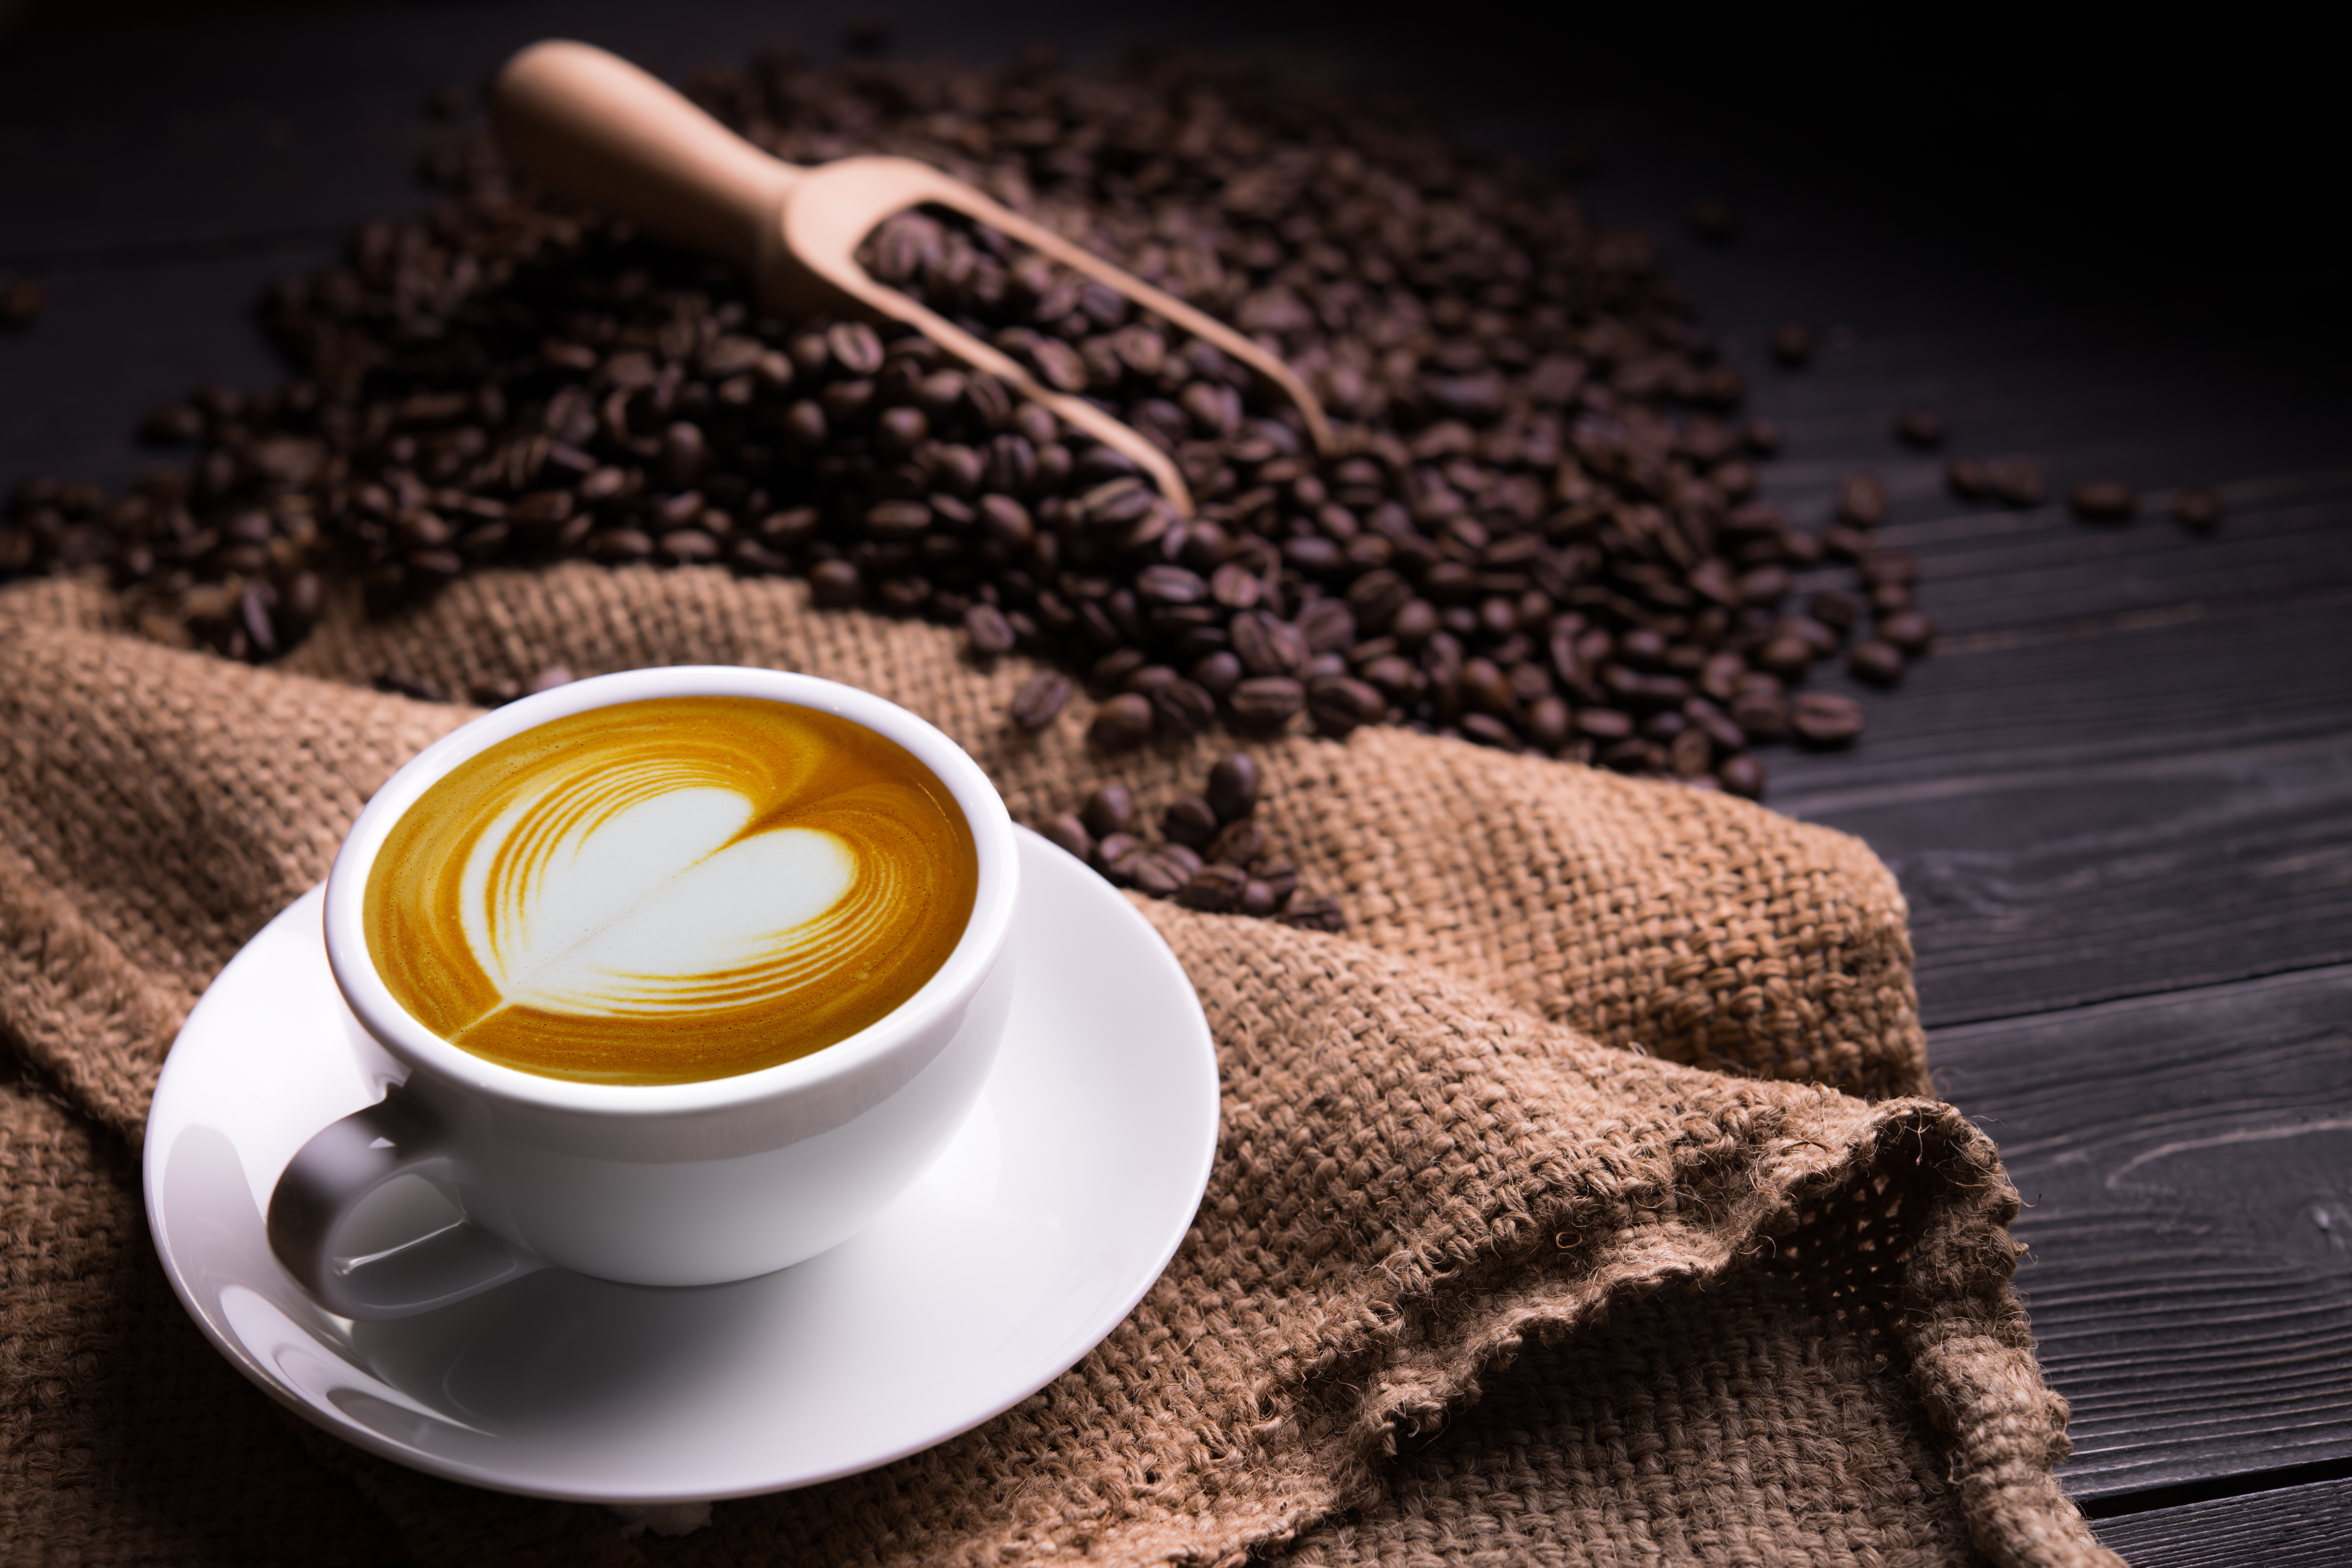 A cup of coffee | Source: Shutterstock